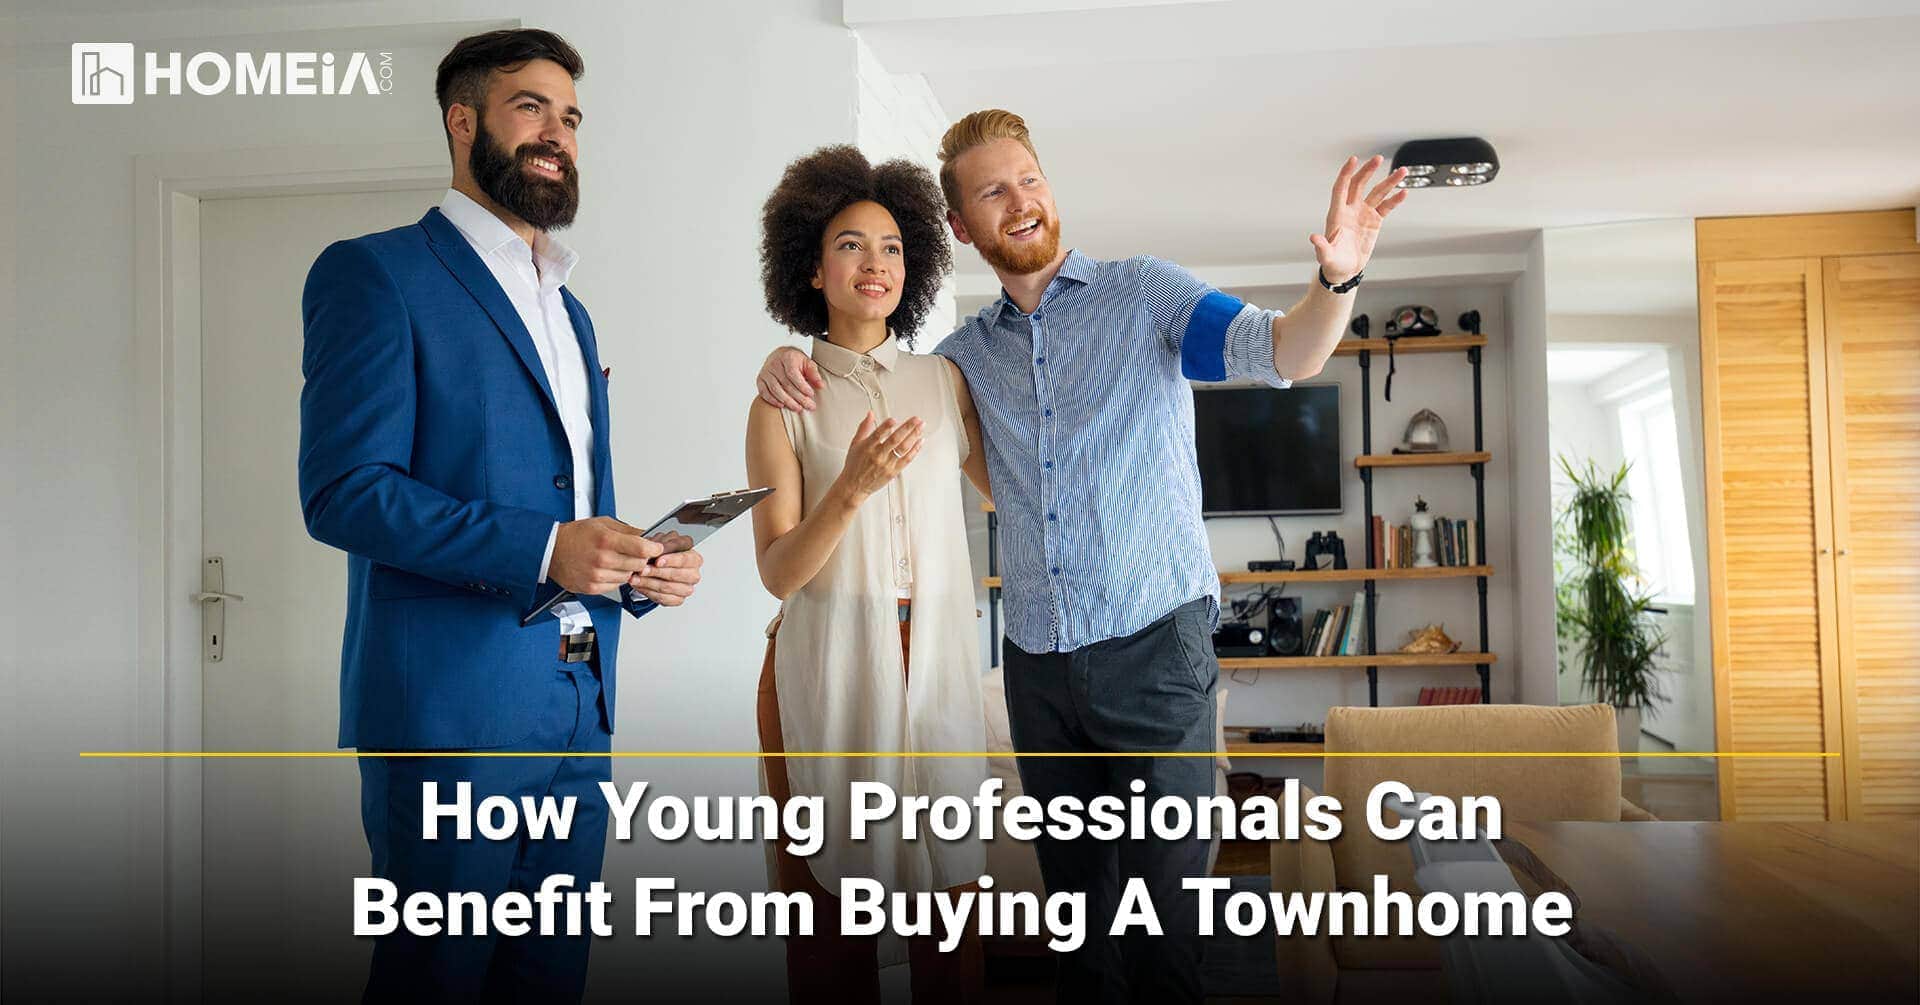 How Young Professionals can Benefit from Buying a Townhome